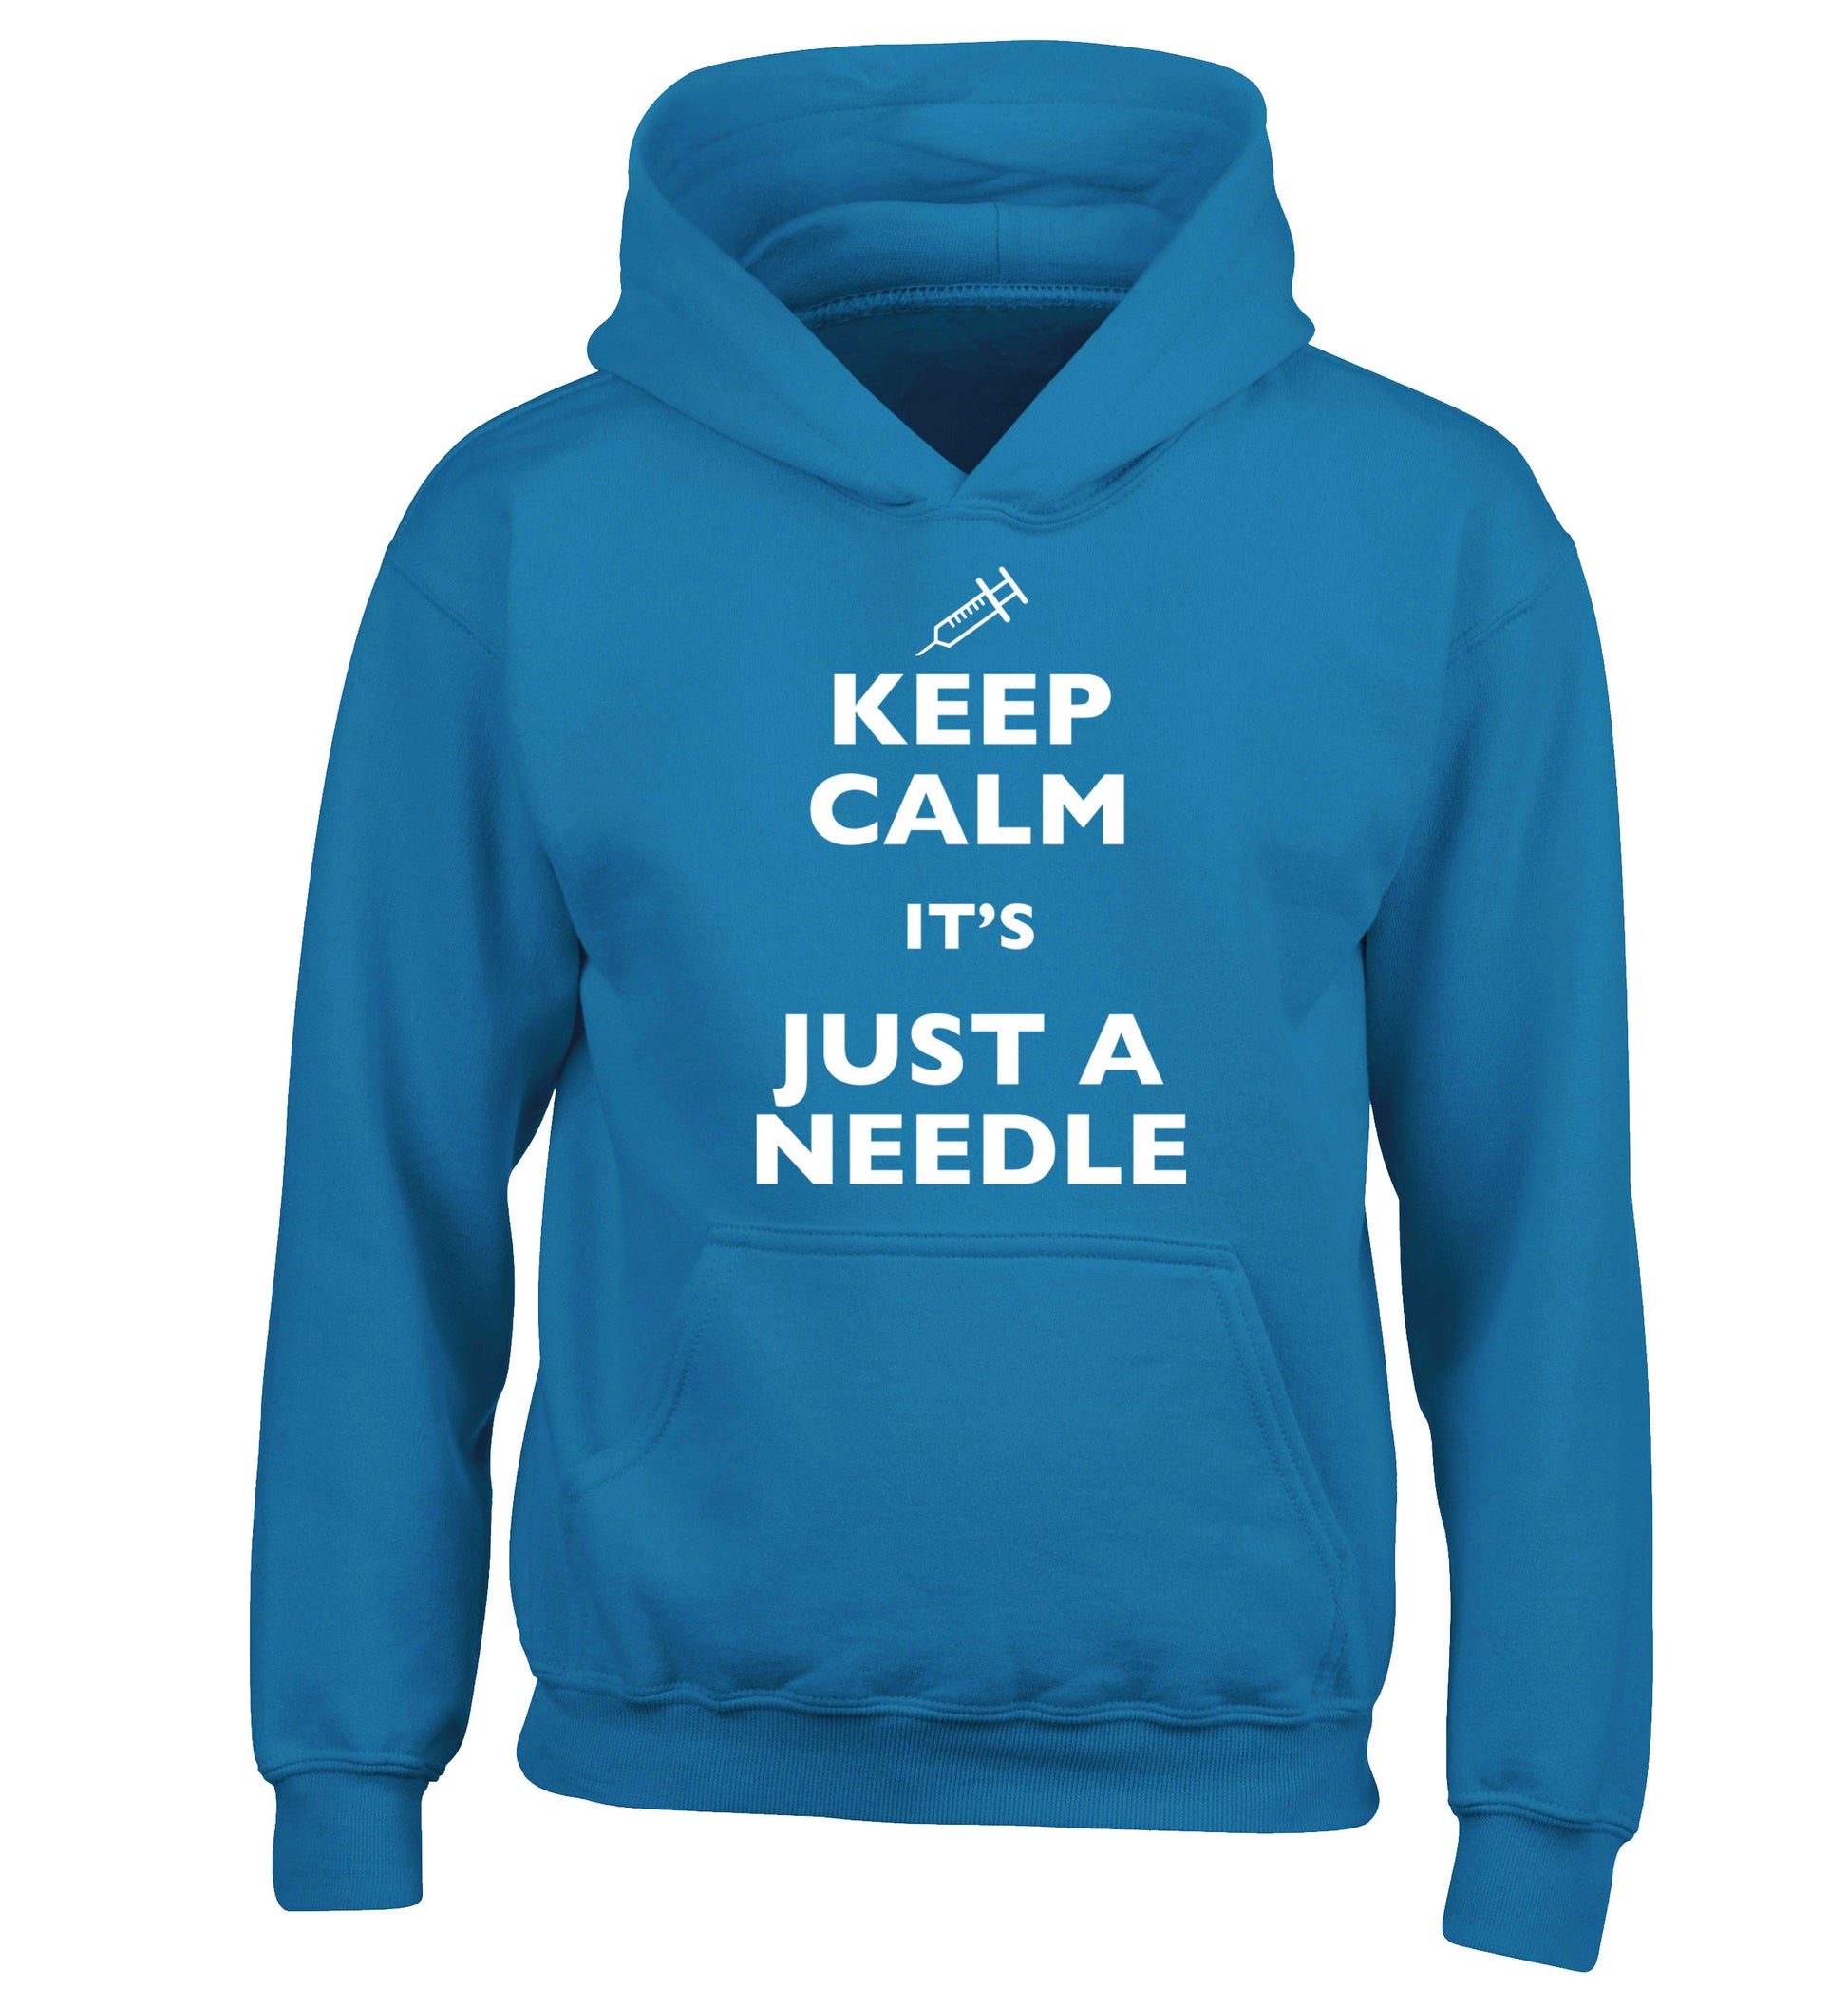 Keep calm it's only a needle children's blue hoodie 12-14 Years